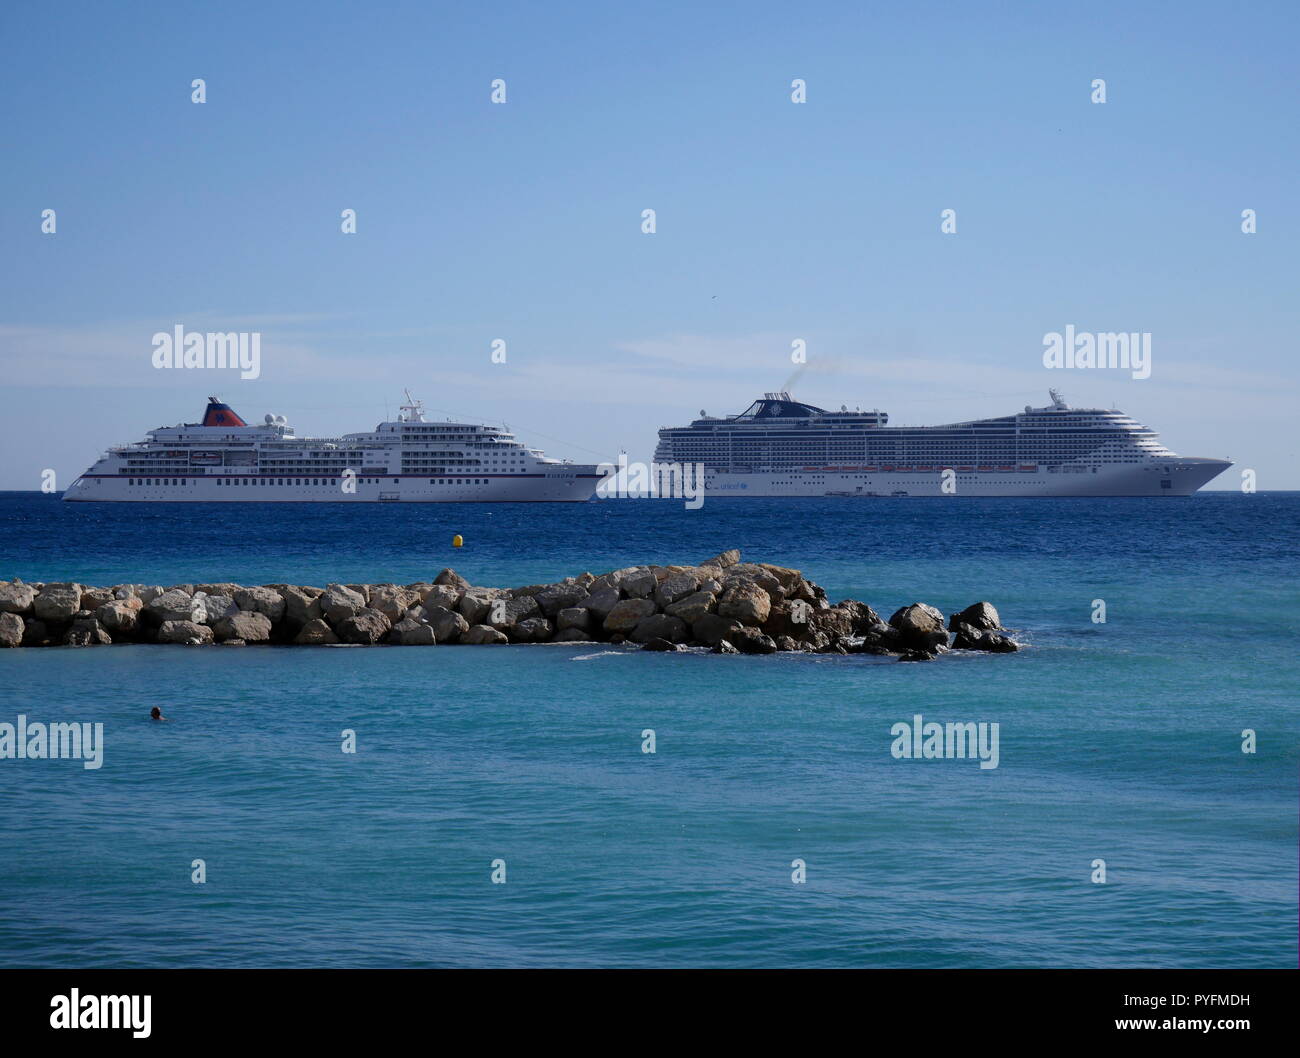 AJAXNETPHOTO. 2018. CANNES, FRANCE. - COTE D'AZUR RESORT - THE HAPAG LLOYD CRUISE LINER EUROPA (L) AND MSC FANTASIA ANCHORED IN THE BAY. PHOTO:JONATHAN EASTLAND/AJAX REF:GX8 180310 770 Stock Photo